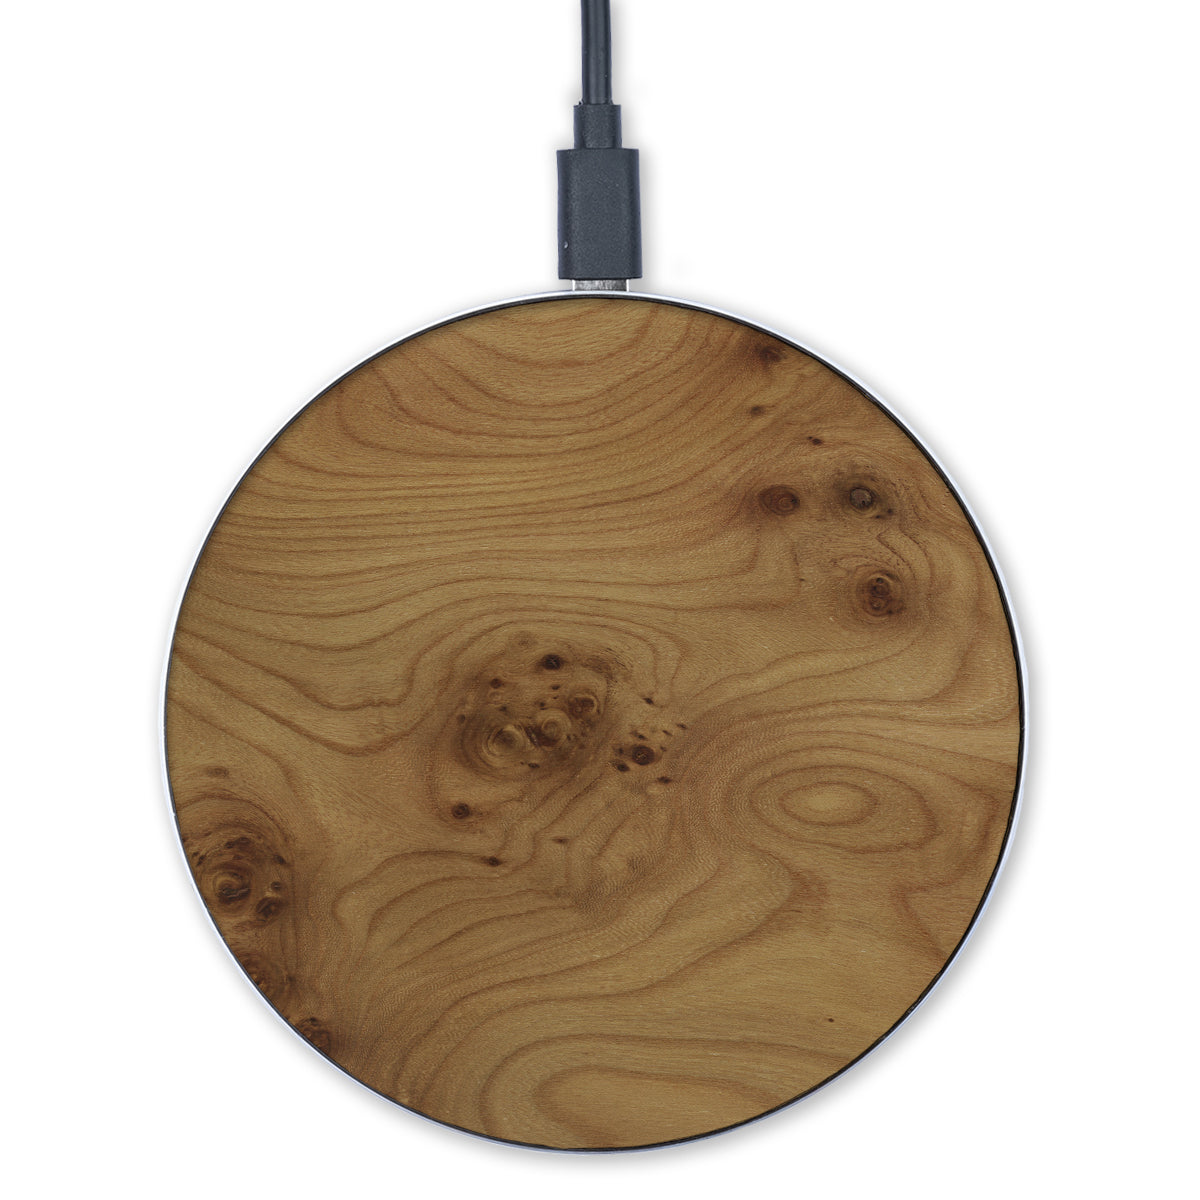 #WoodBack Wireless Charger